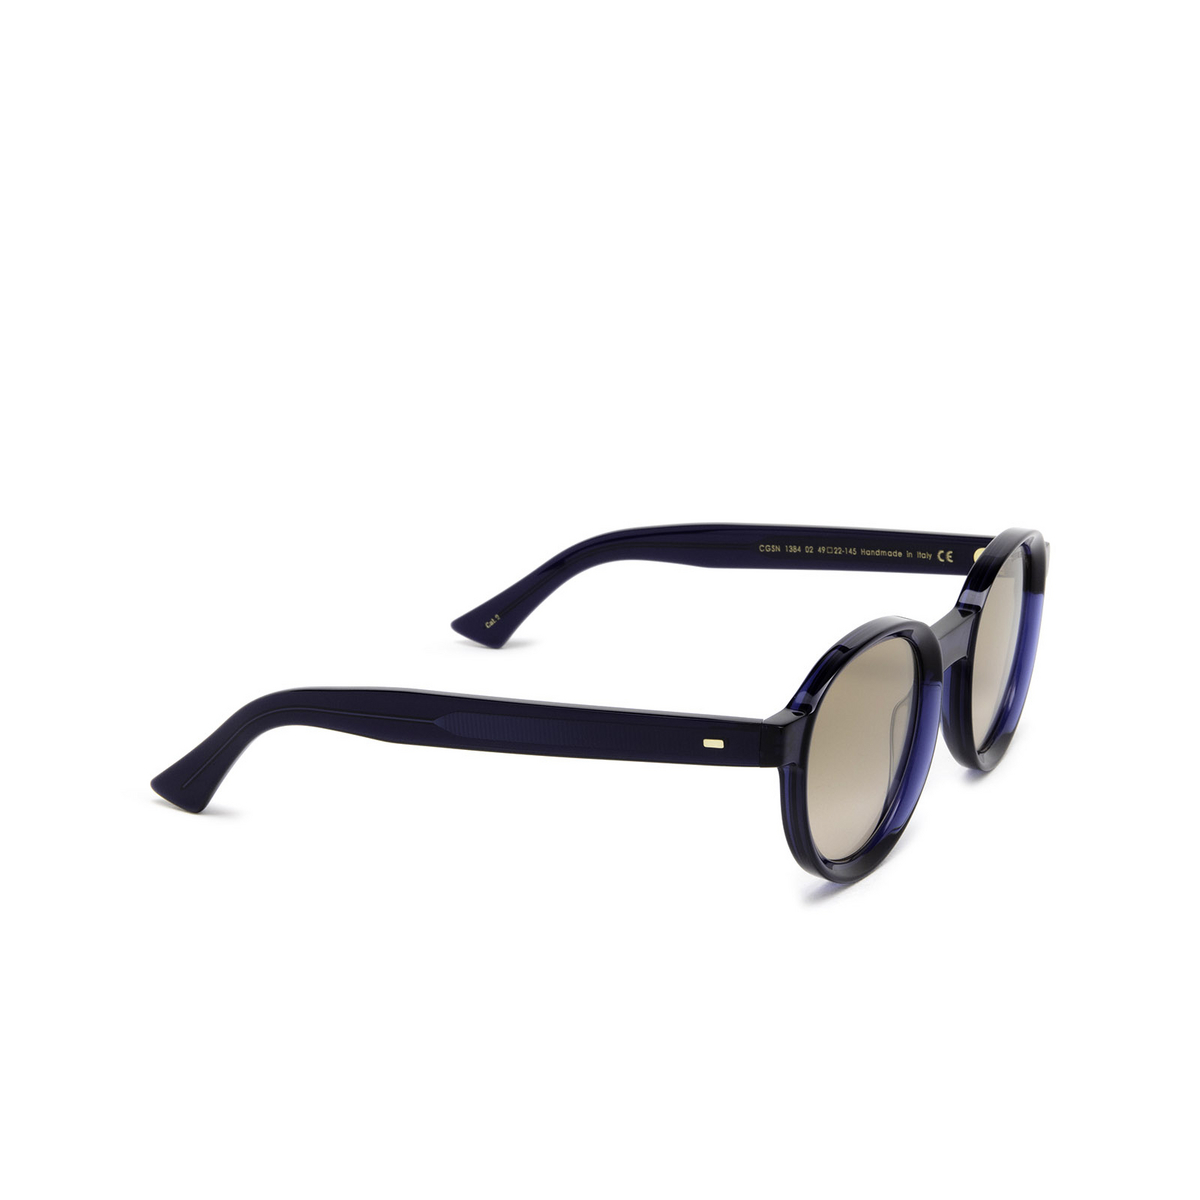 Cutler and Gross® Round Sunglasses: 1384 SUN color Classic Navy Blue 02 - three-quarters view.